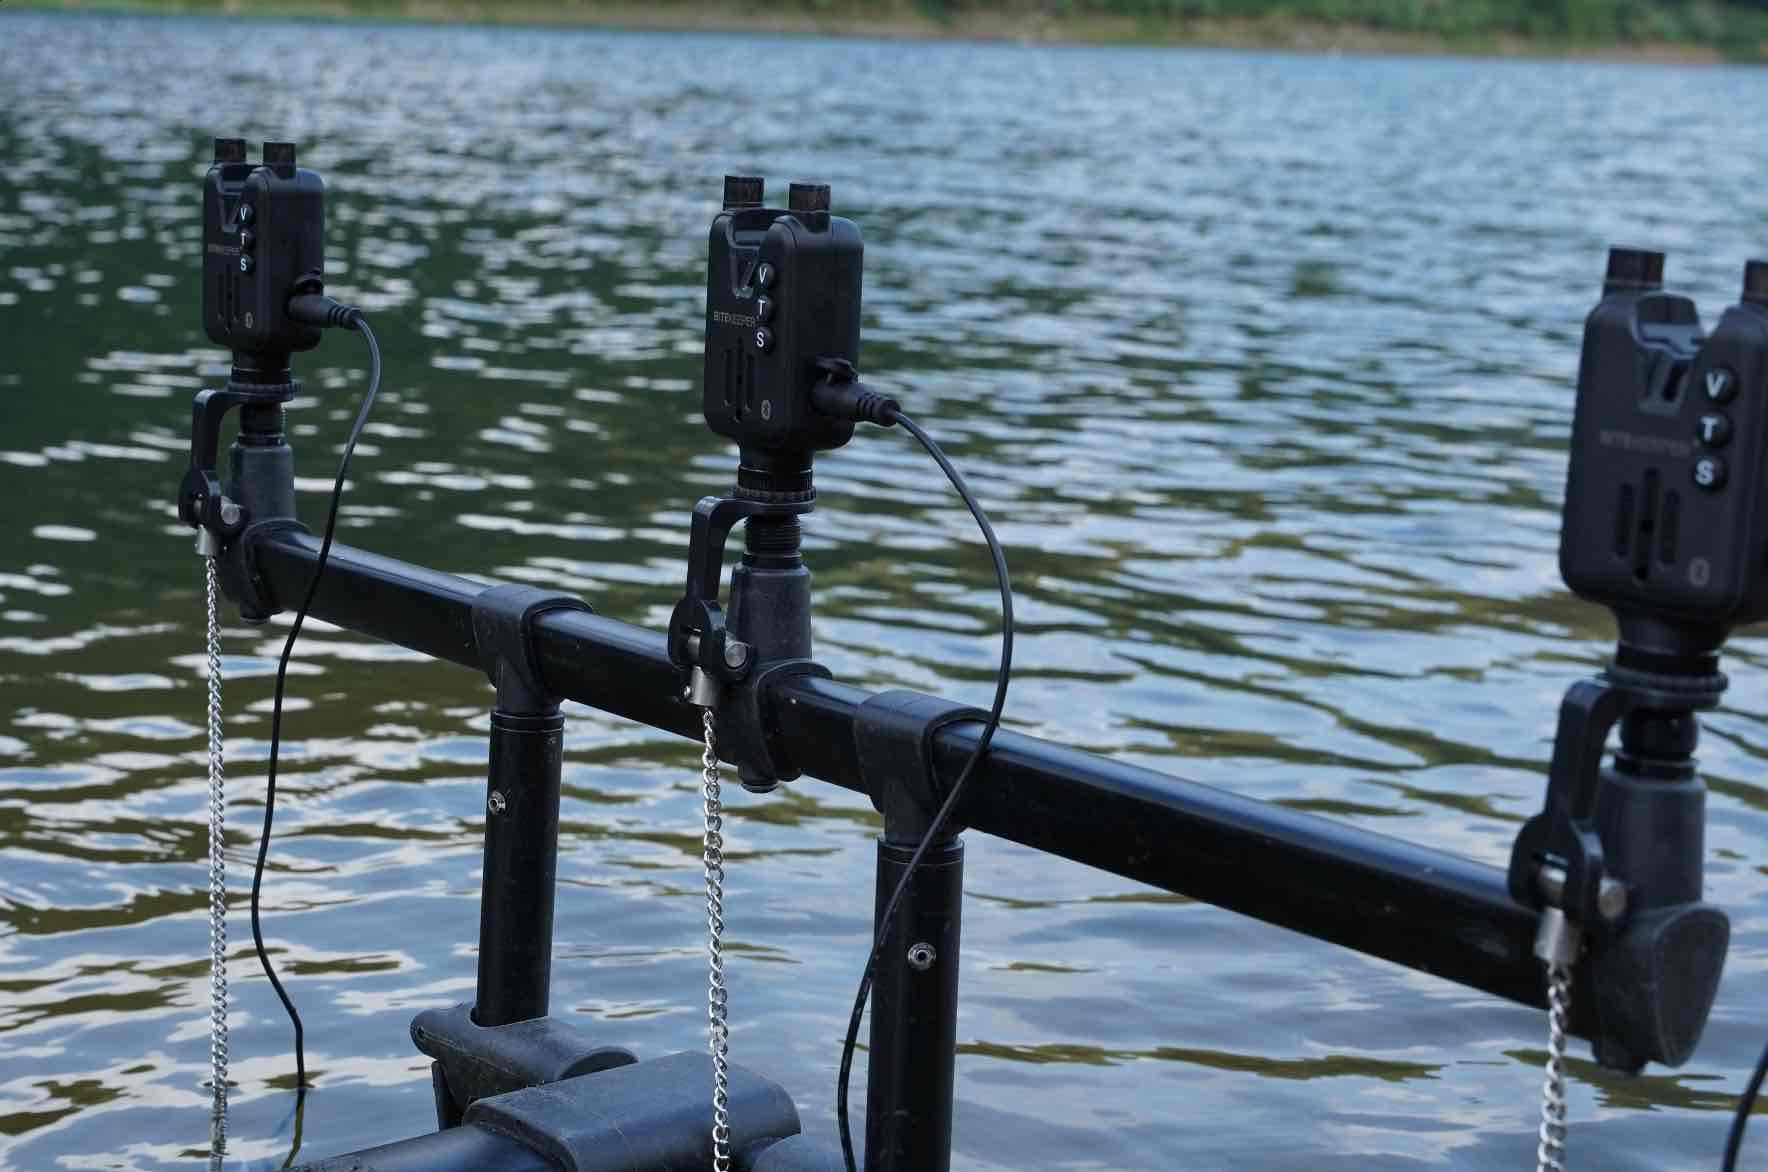 Choosing and Using Fish Bite Alarms Effectively - Rippton